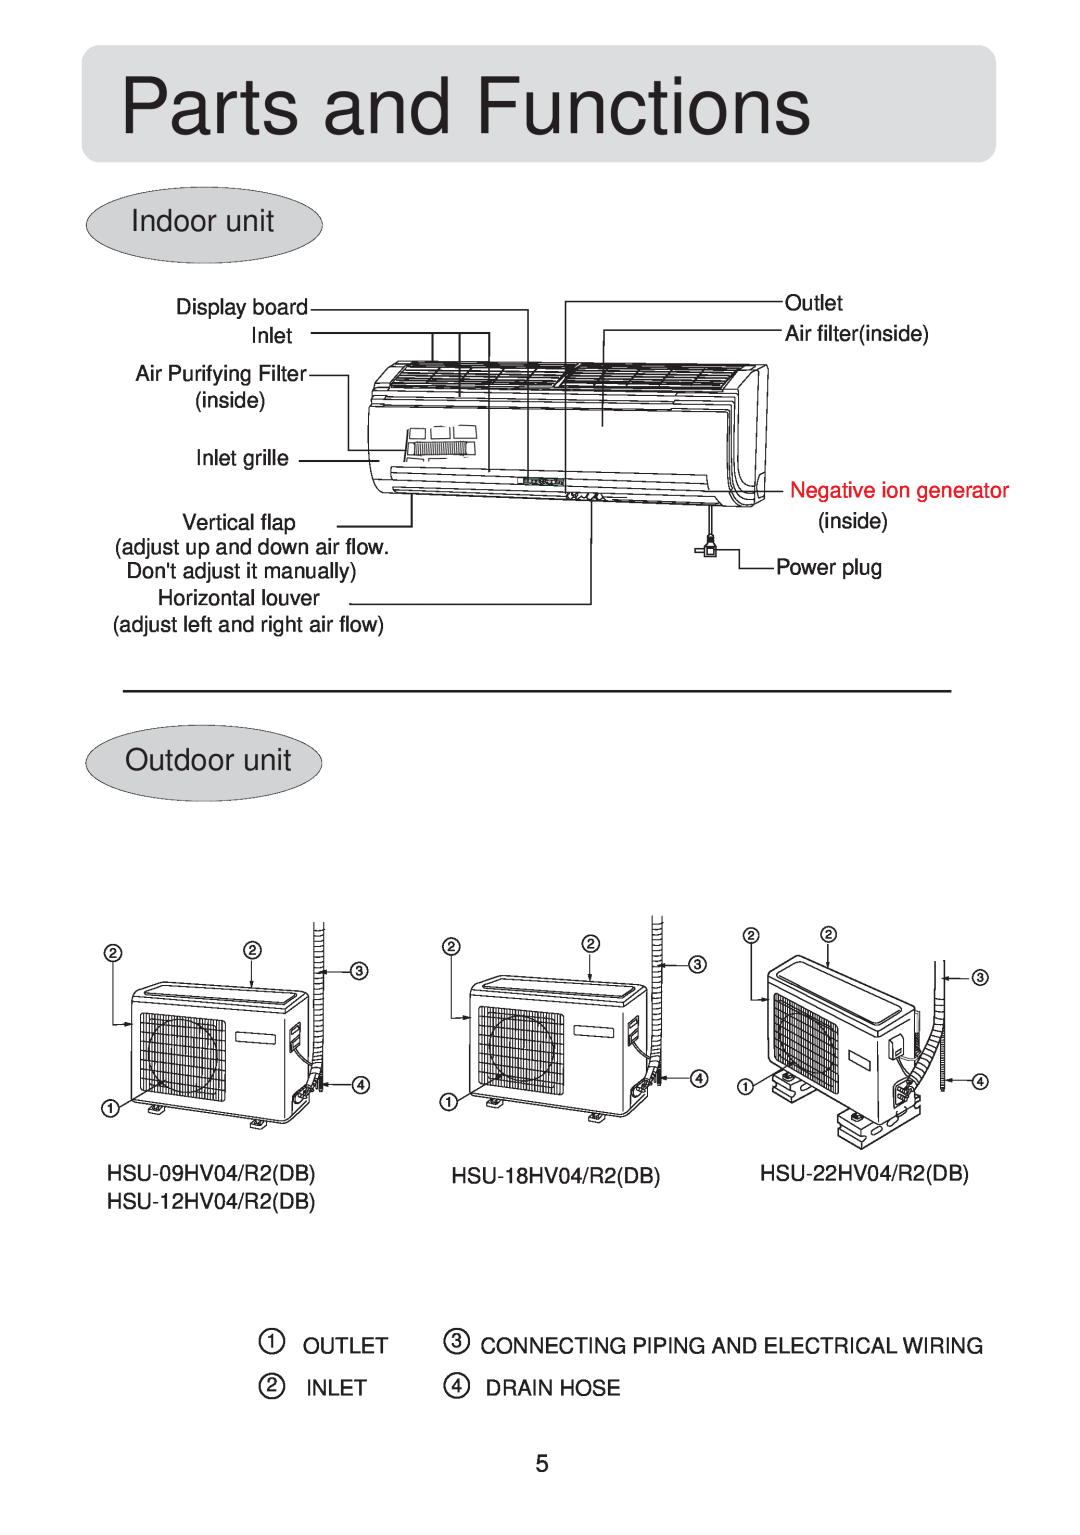 Haier HSU-09HV04, HSU-12HV04, HSU-18HV04, HSU-22HV04 operation manual Parts and Functions, Indoor unit, Outdoor unit 